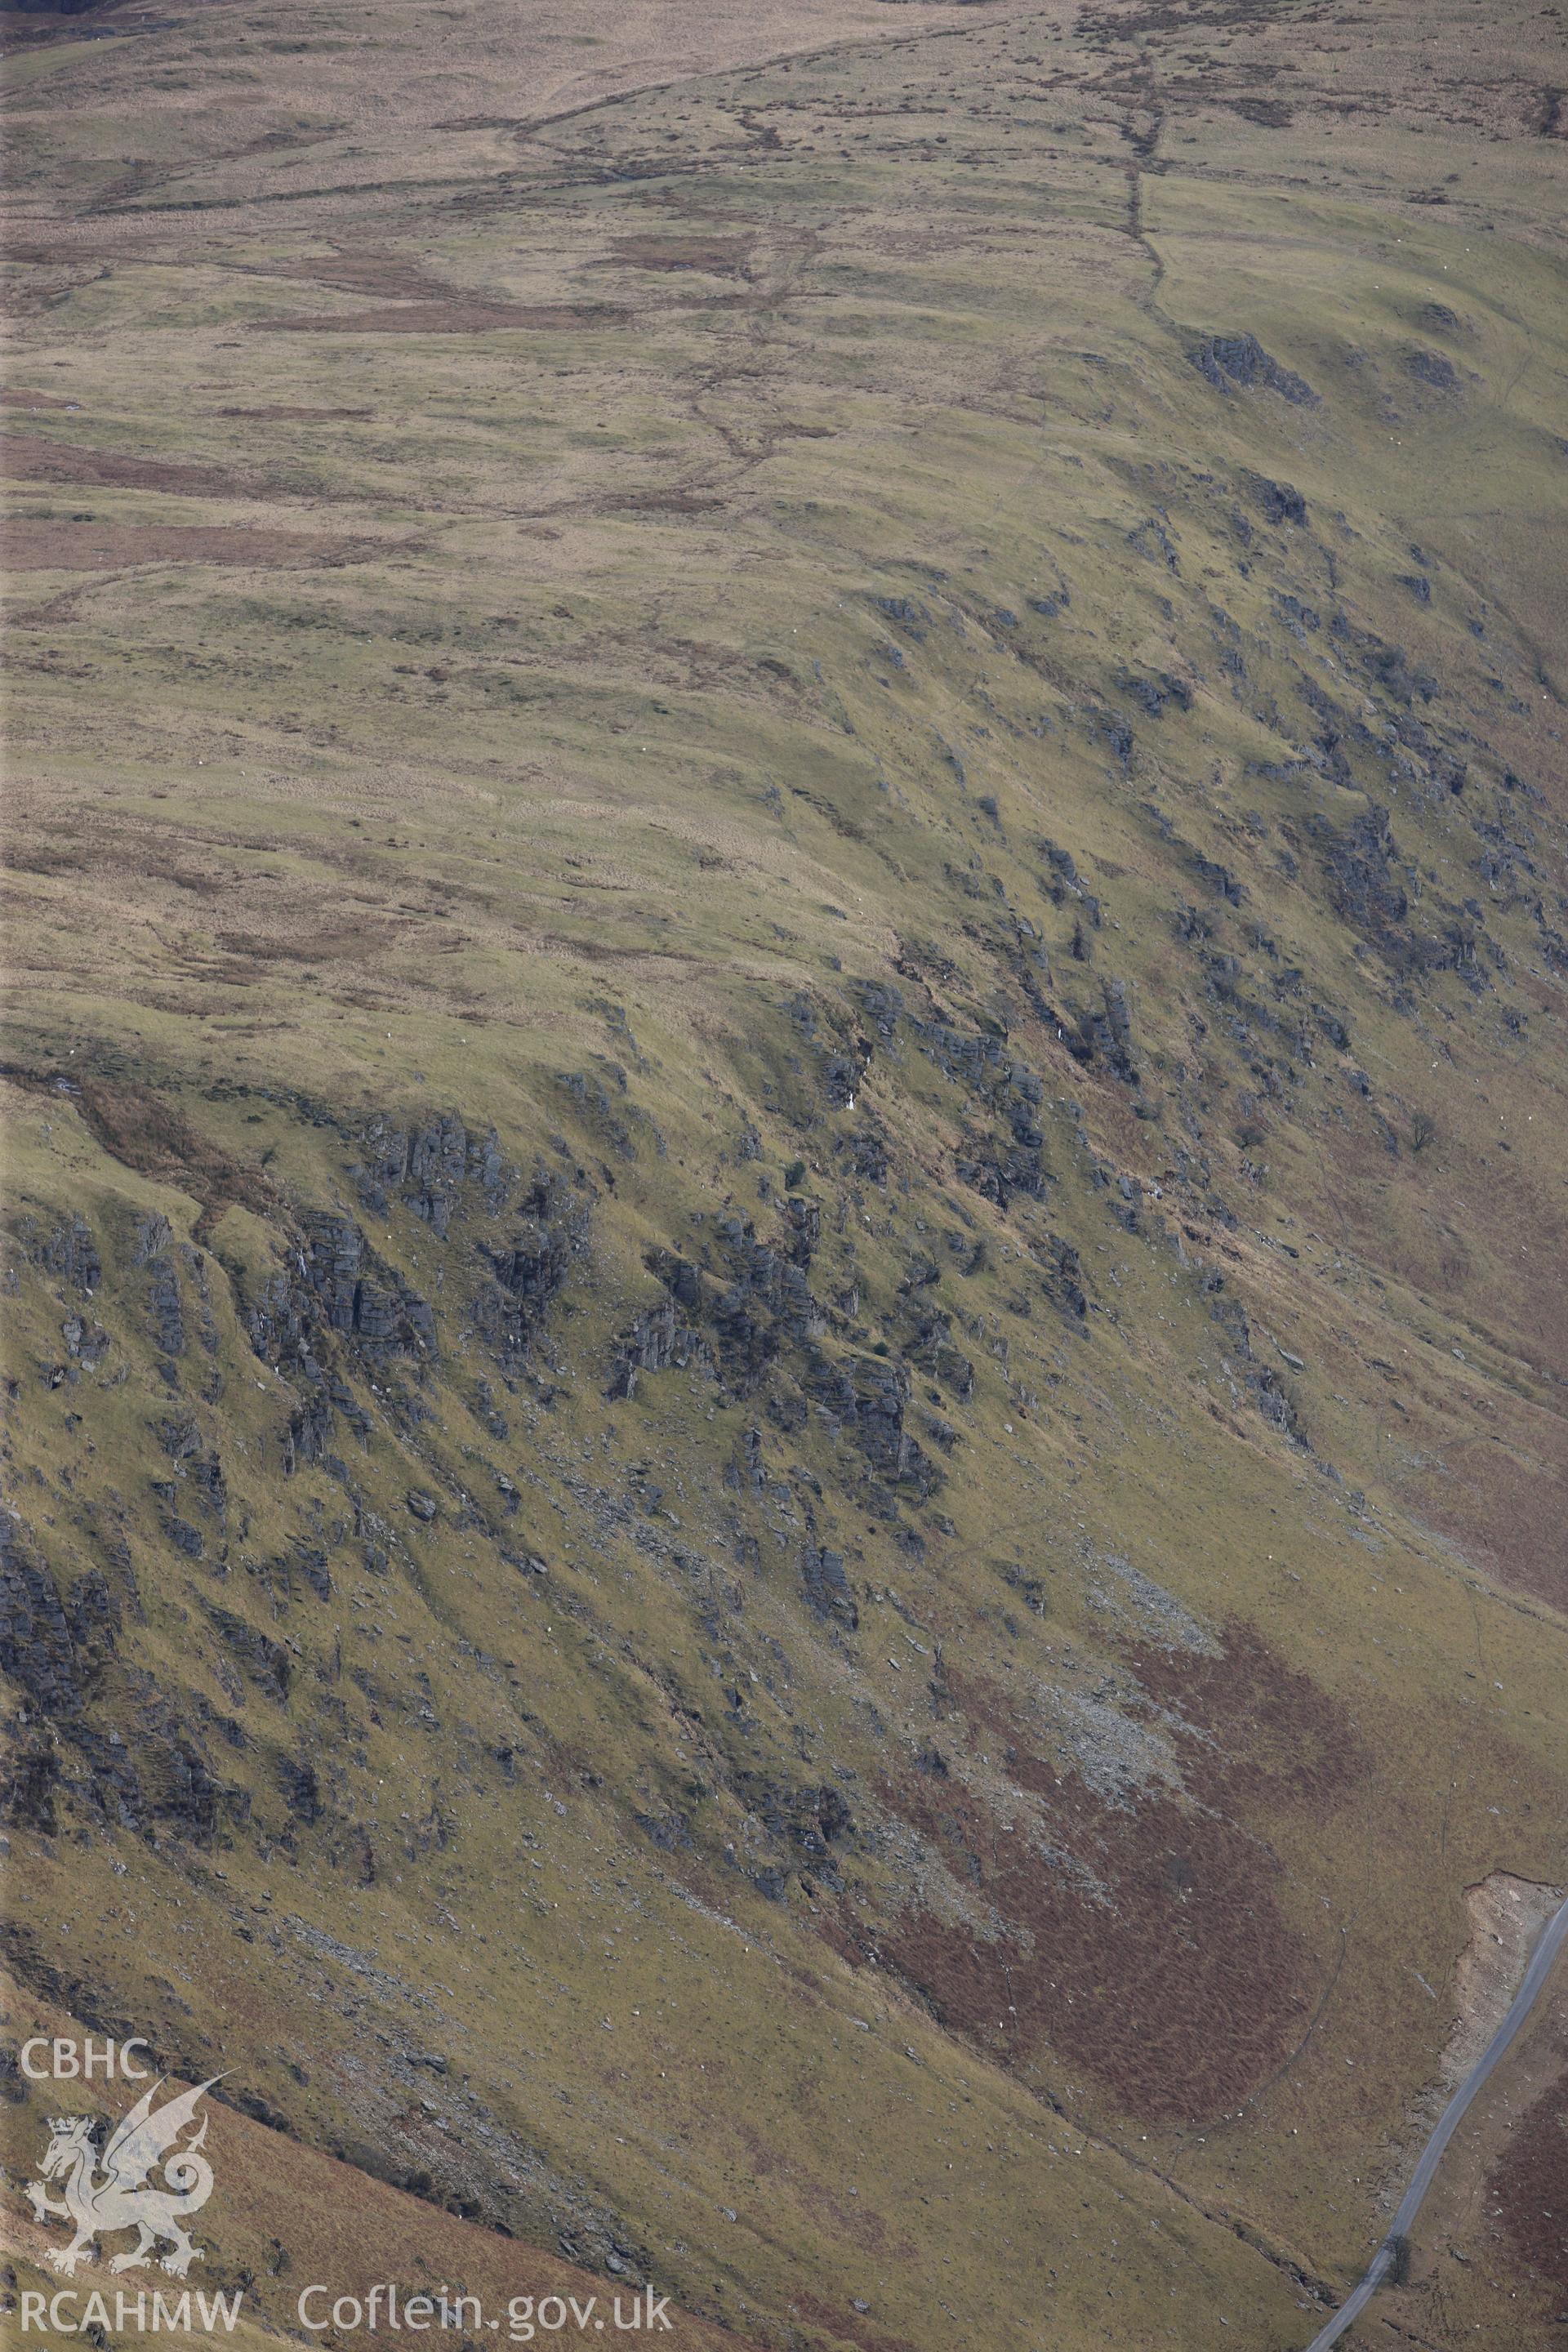 Esgair Irfon cairn in the Cambrian Mountains, north west of Llangurig. Oblique aerial photograph taken during the Royal Commission?s programme of archaeological aerial reconnaissance by Toby Driver on 28th February 2013.